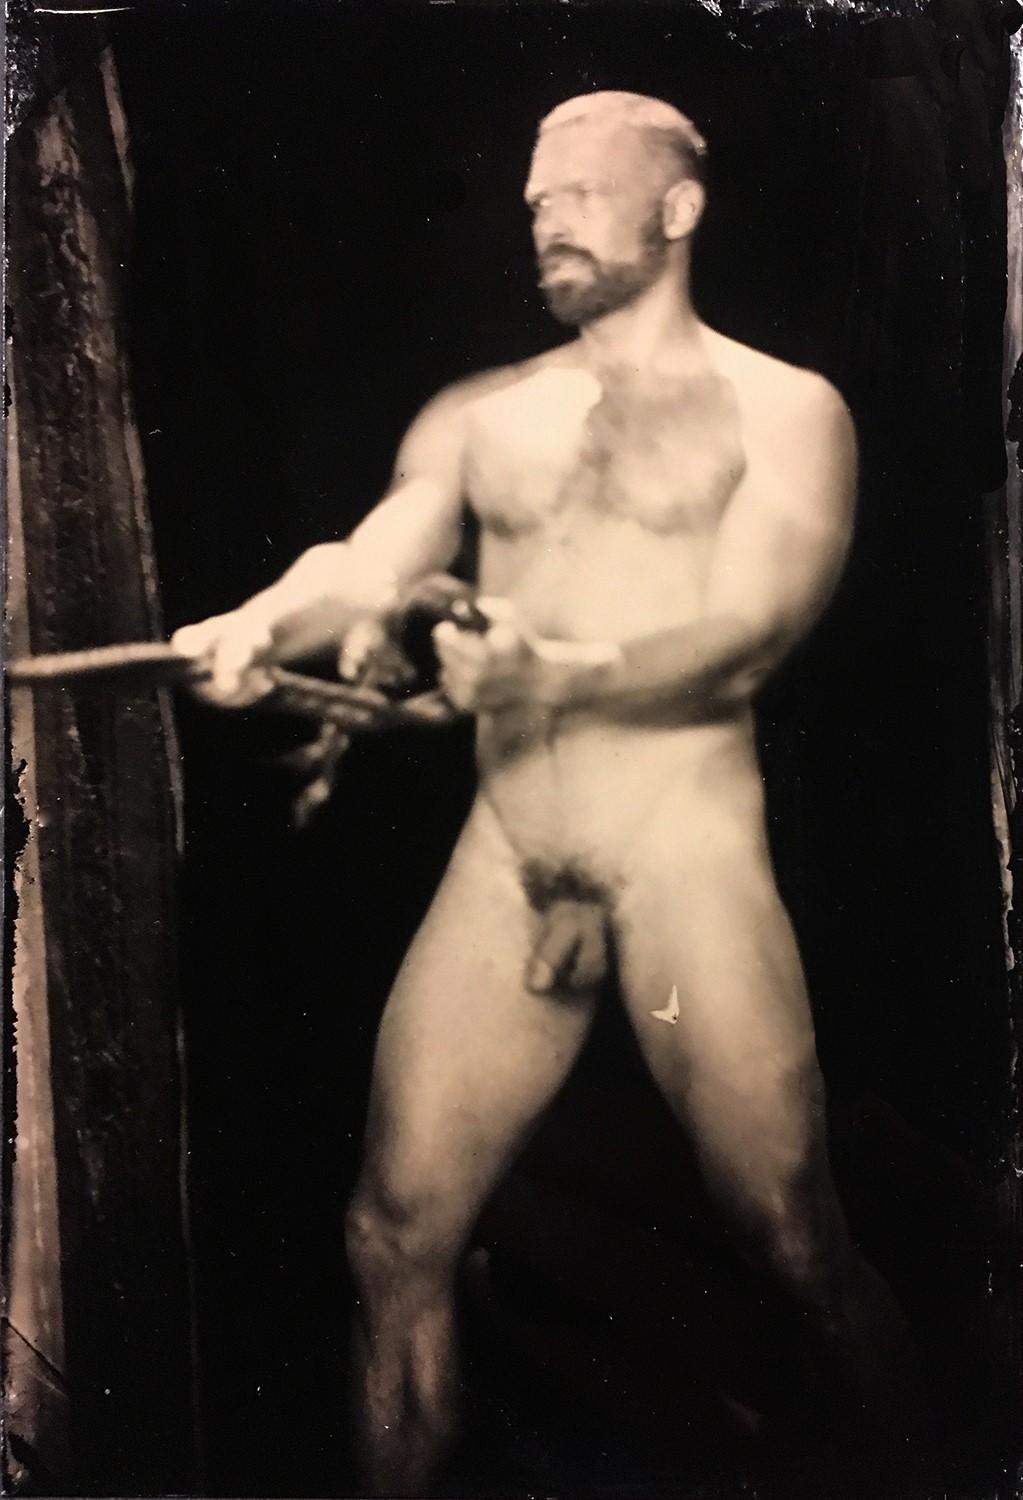 David Sokosh Figurative Photograph - Nathan With Rope (Figurative Tin Type Photograph of Male Nude in Vintage Frame)